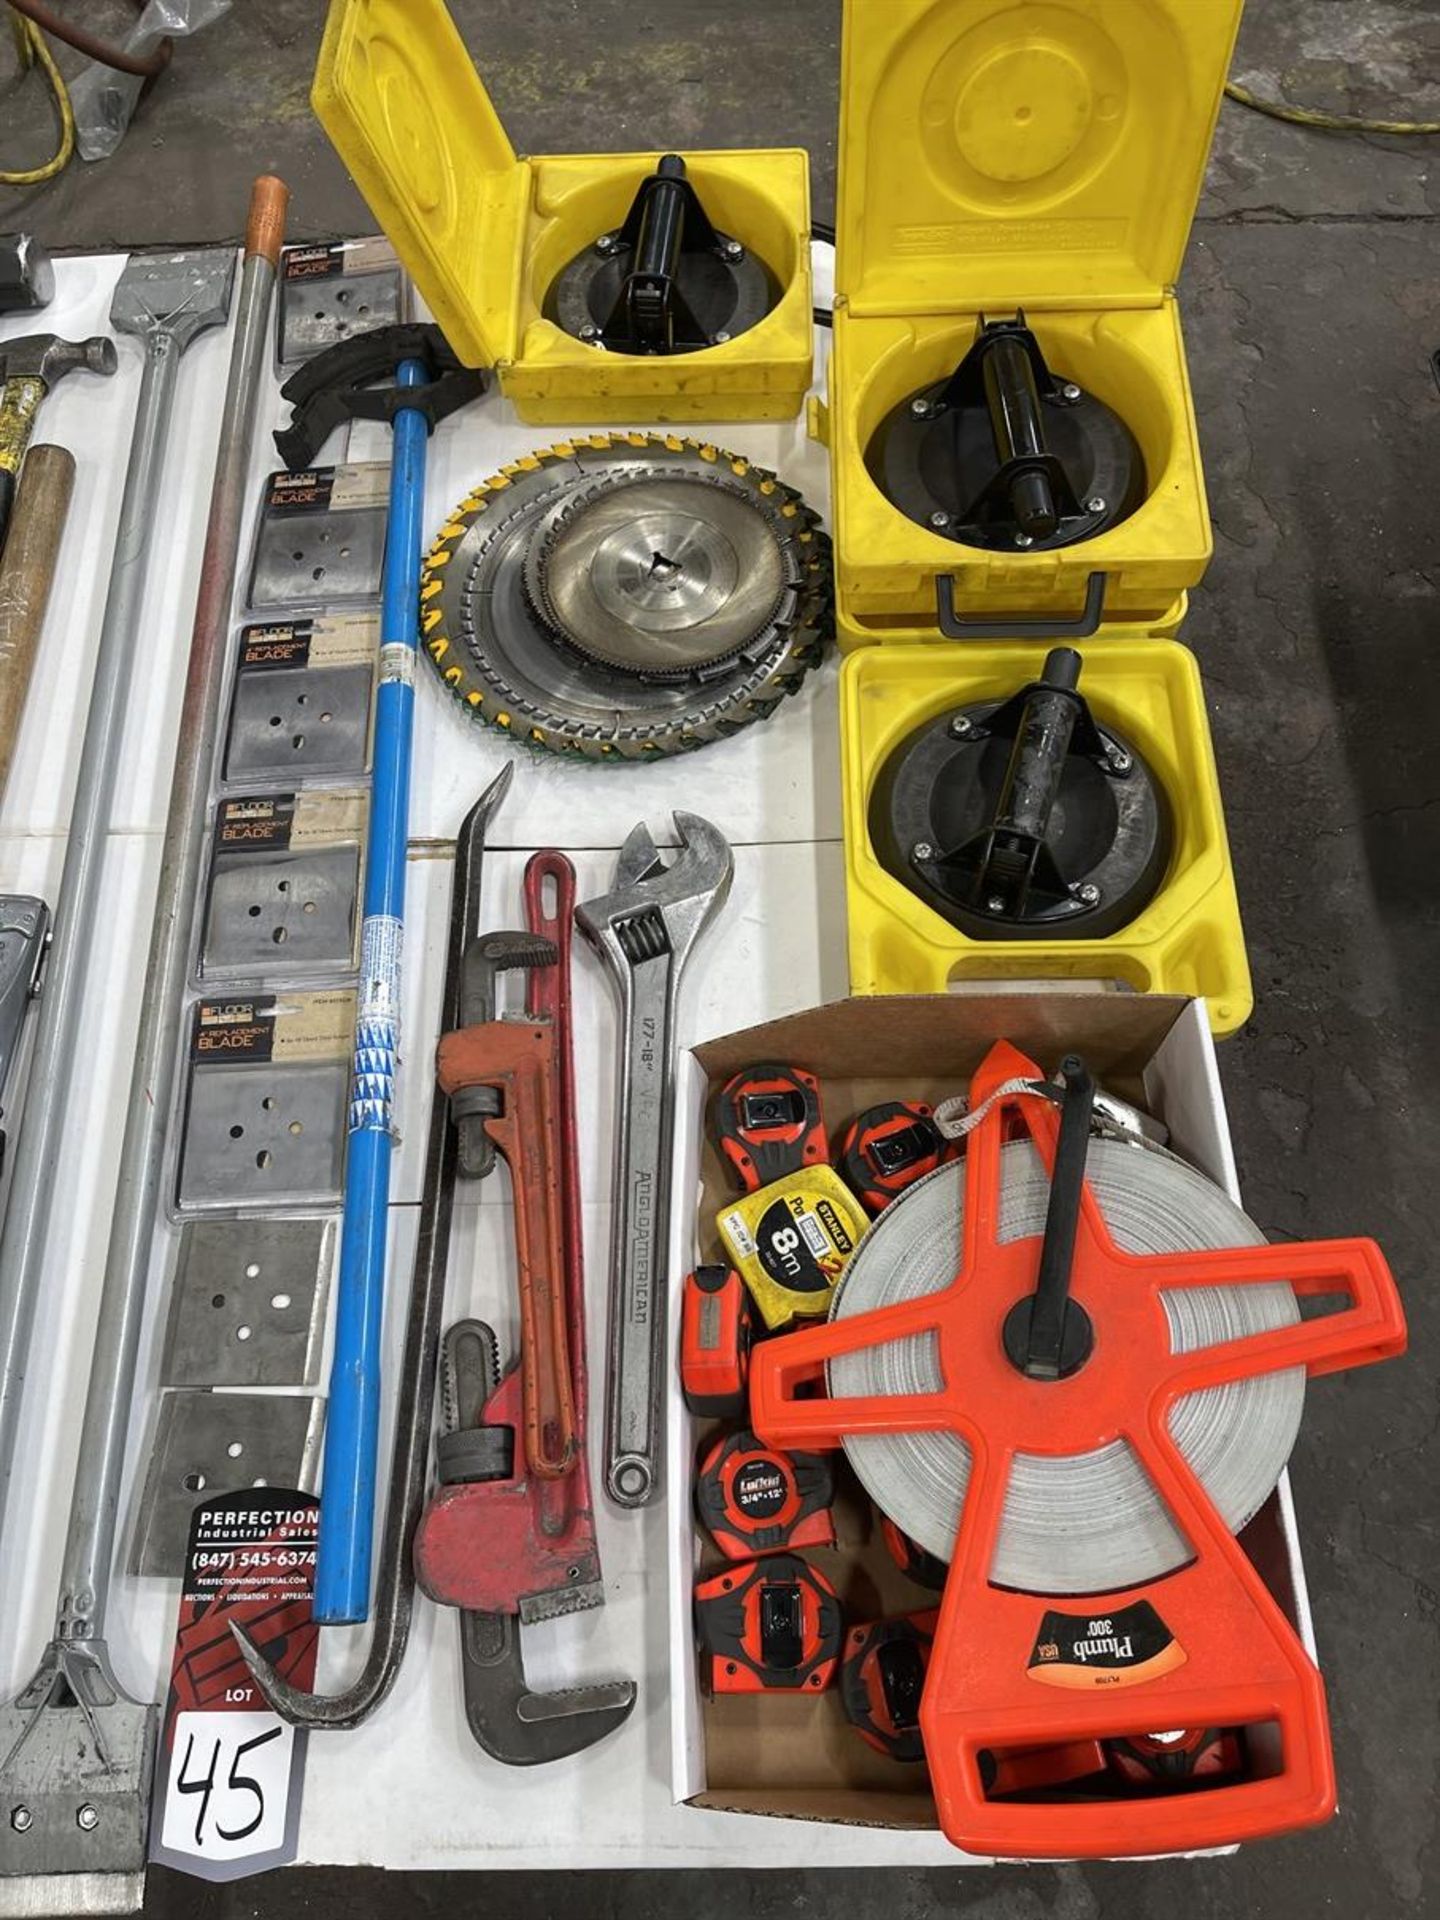 Lot Comprising Hammers, Scrapers, Suction Cups, Tube Bender, Pipe Wrenches and Tape Measures - Image 3 of 3